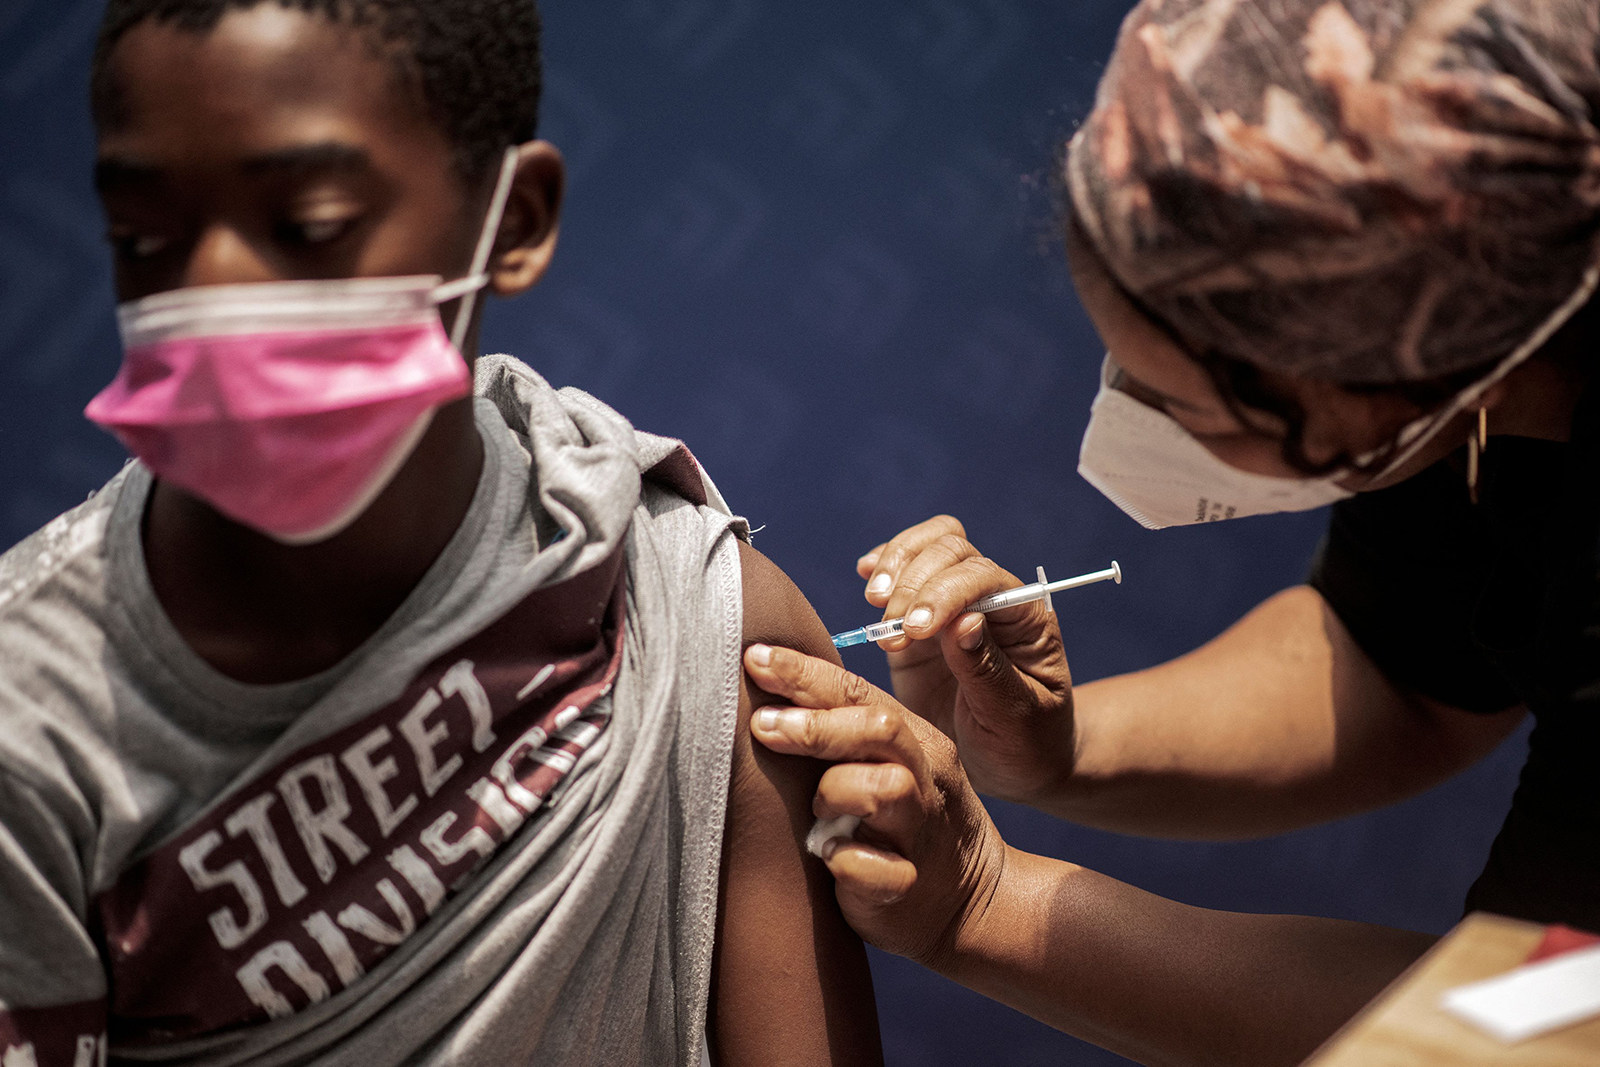 A boy receives a dose of the Pfizer-BioNTech vaccine at the Discovery vaccination site in Sandton, Johannesburg, on December 15. Photo: TNS